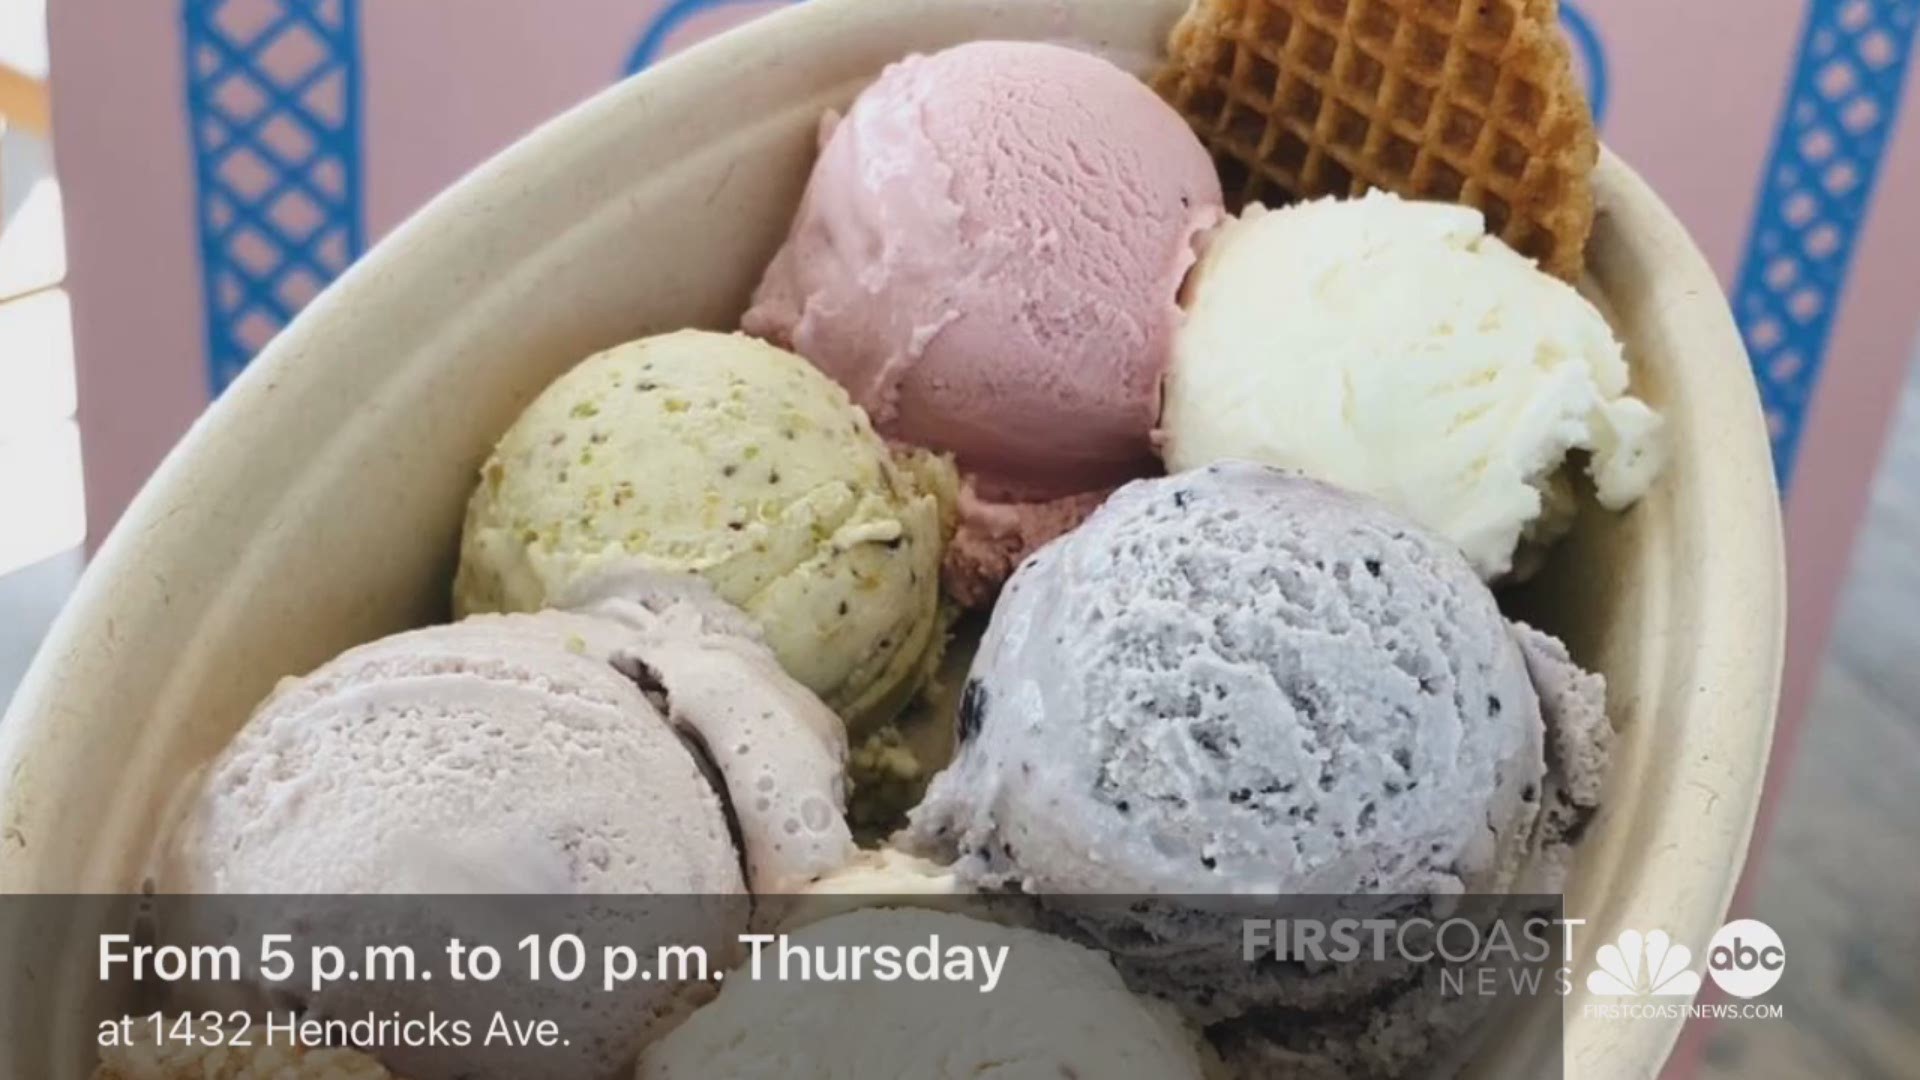 It currently offers 24 different flavors, ranging from traditional flavors like chocolate and vanilla to some of their more unique flavors like Coffee and Donuts. It also offers a few non-dairy and gluten-free options.